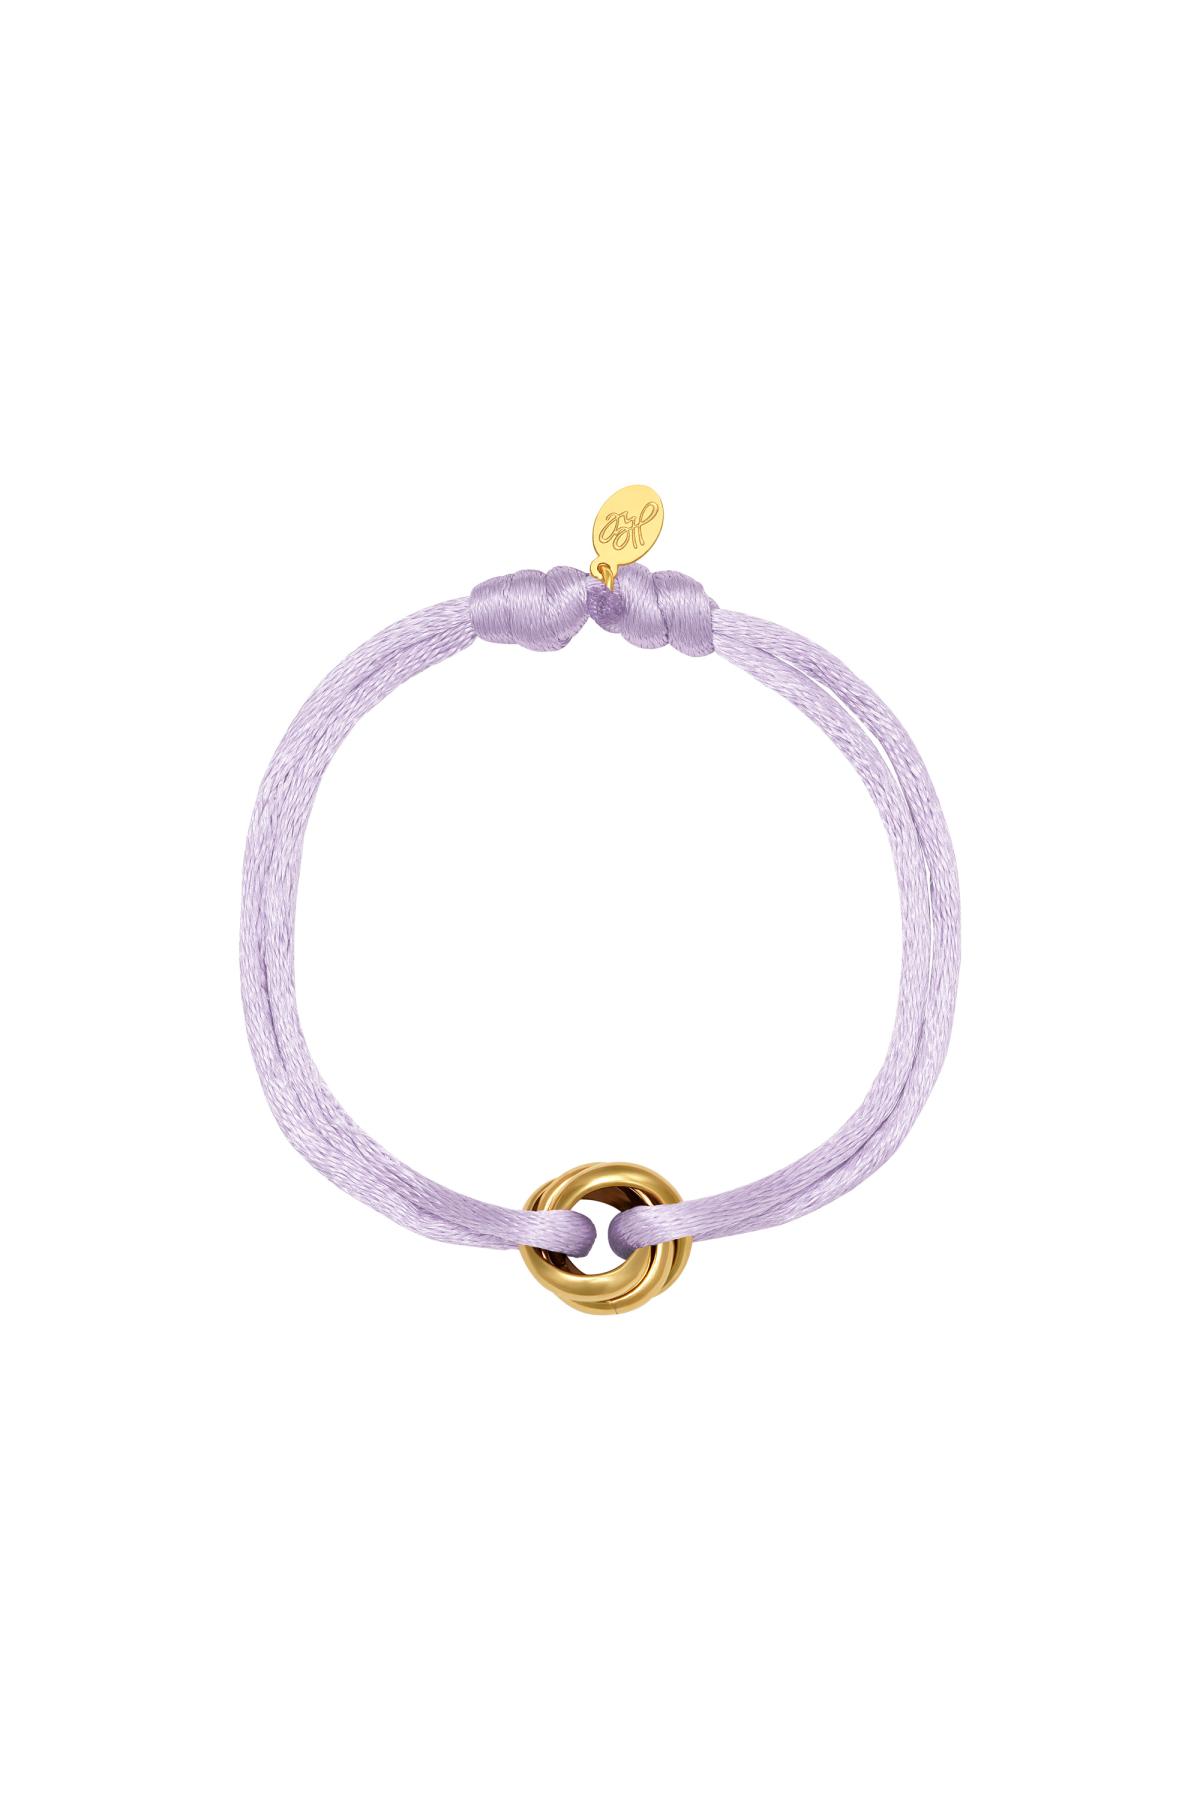 Lilac / Bracelet Satin Knot Lilac Stainless Steel Picture4